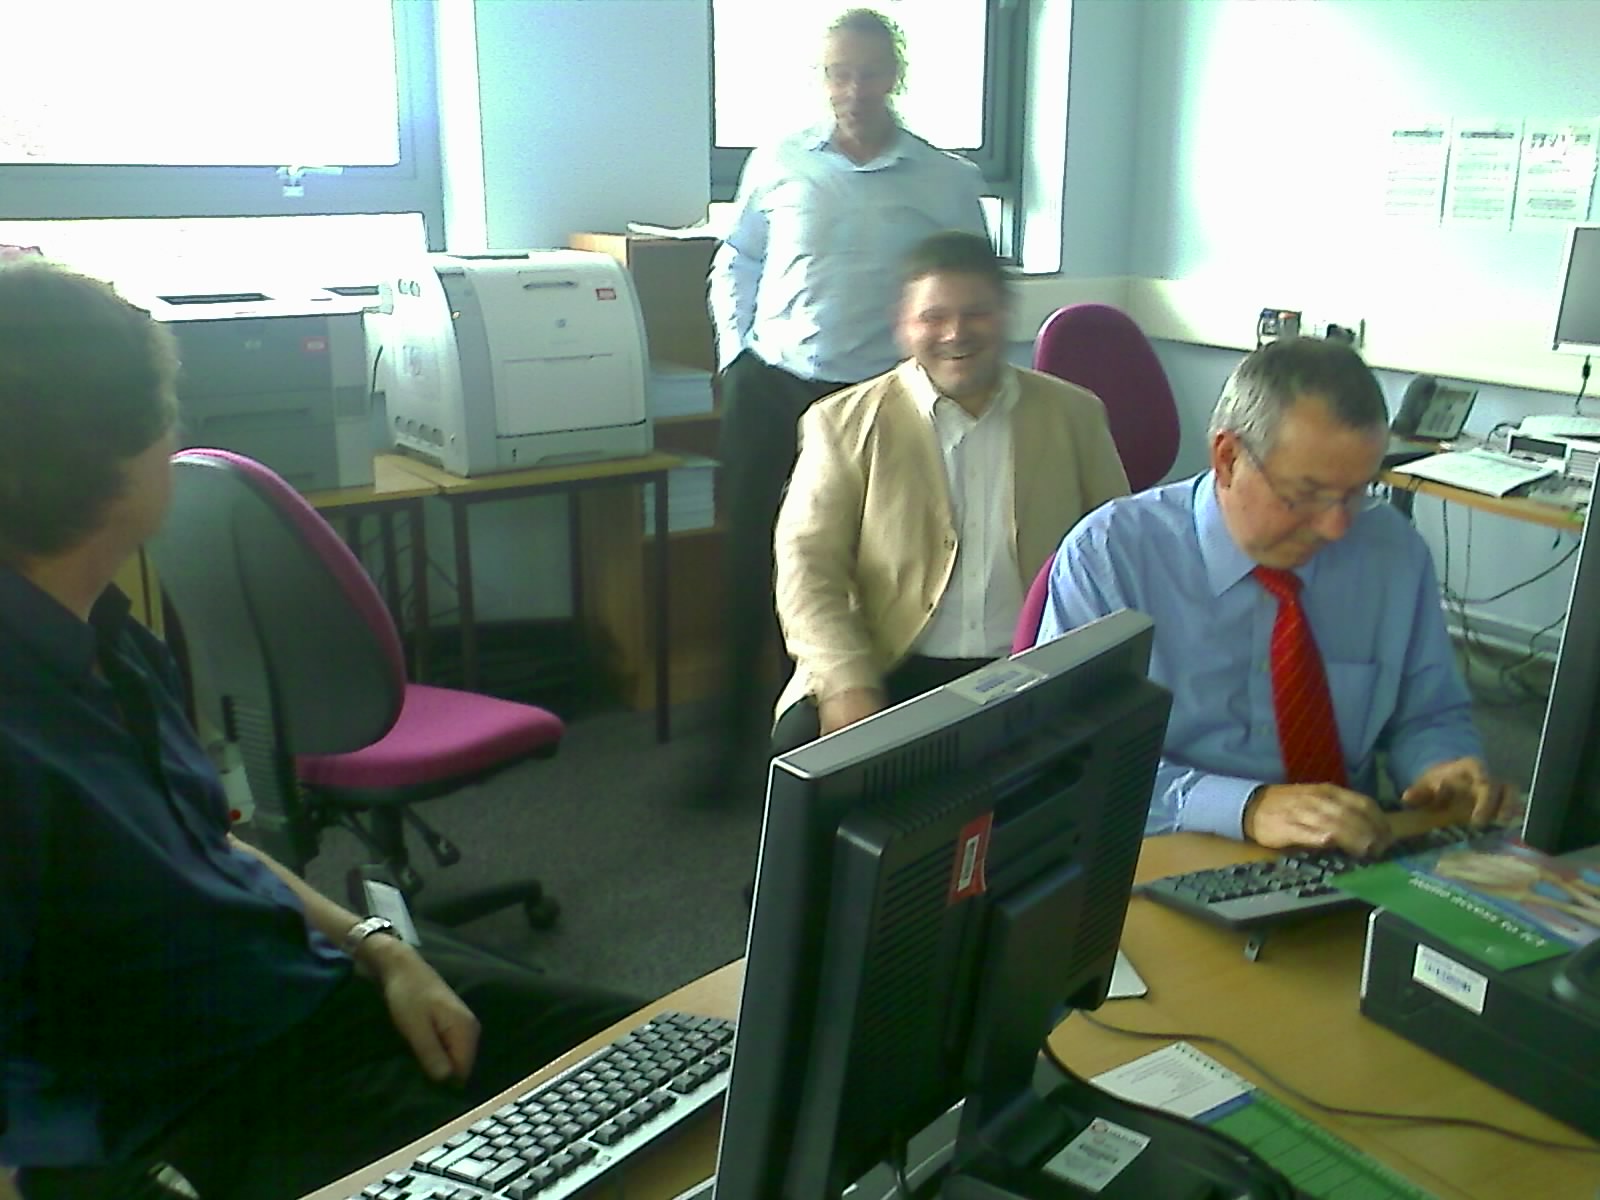 three people working in an office with one man on the phone